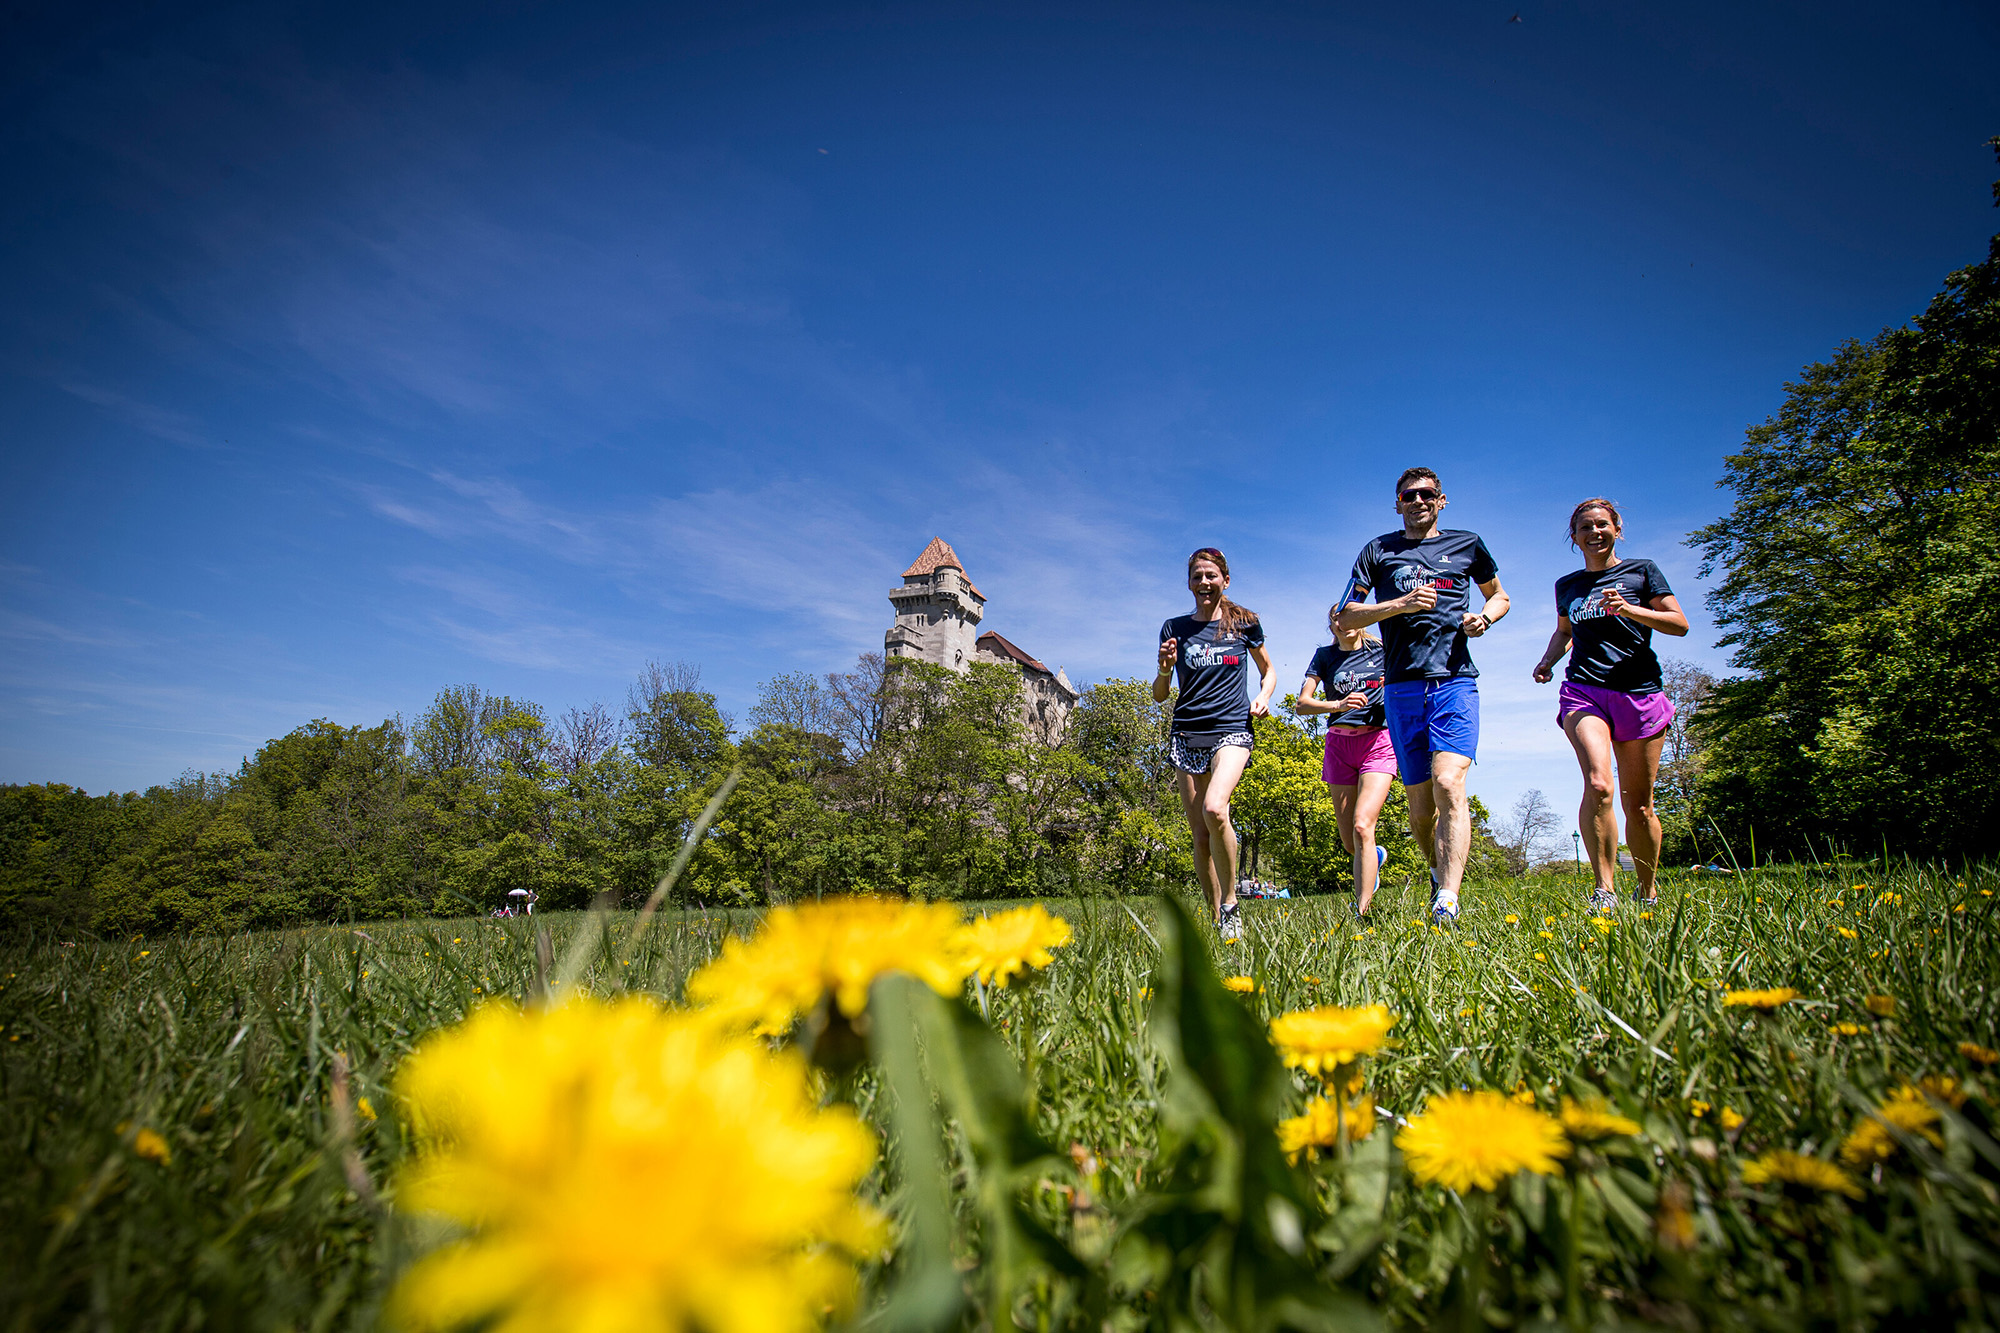 Micheael Buchleitner and participants perform during the Wings for Life World Run App Run in Moedling, Austria on May 09, 2021 // SI202105090252 // Usage for editorial use only //